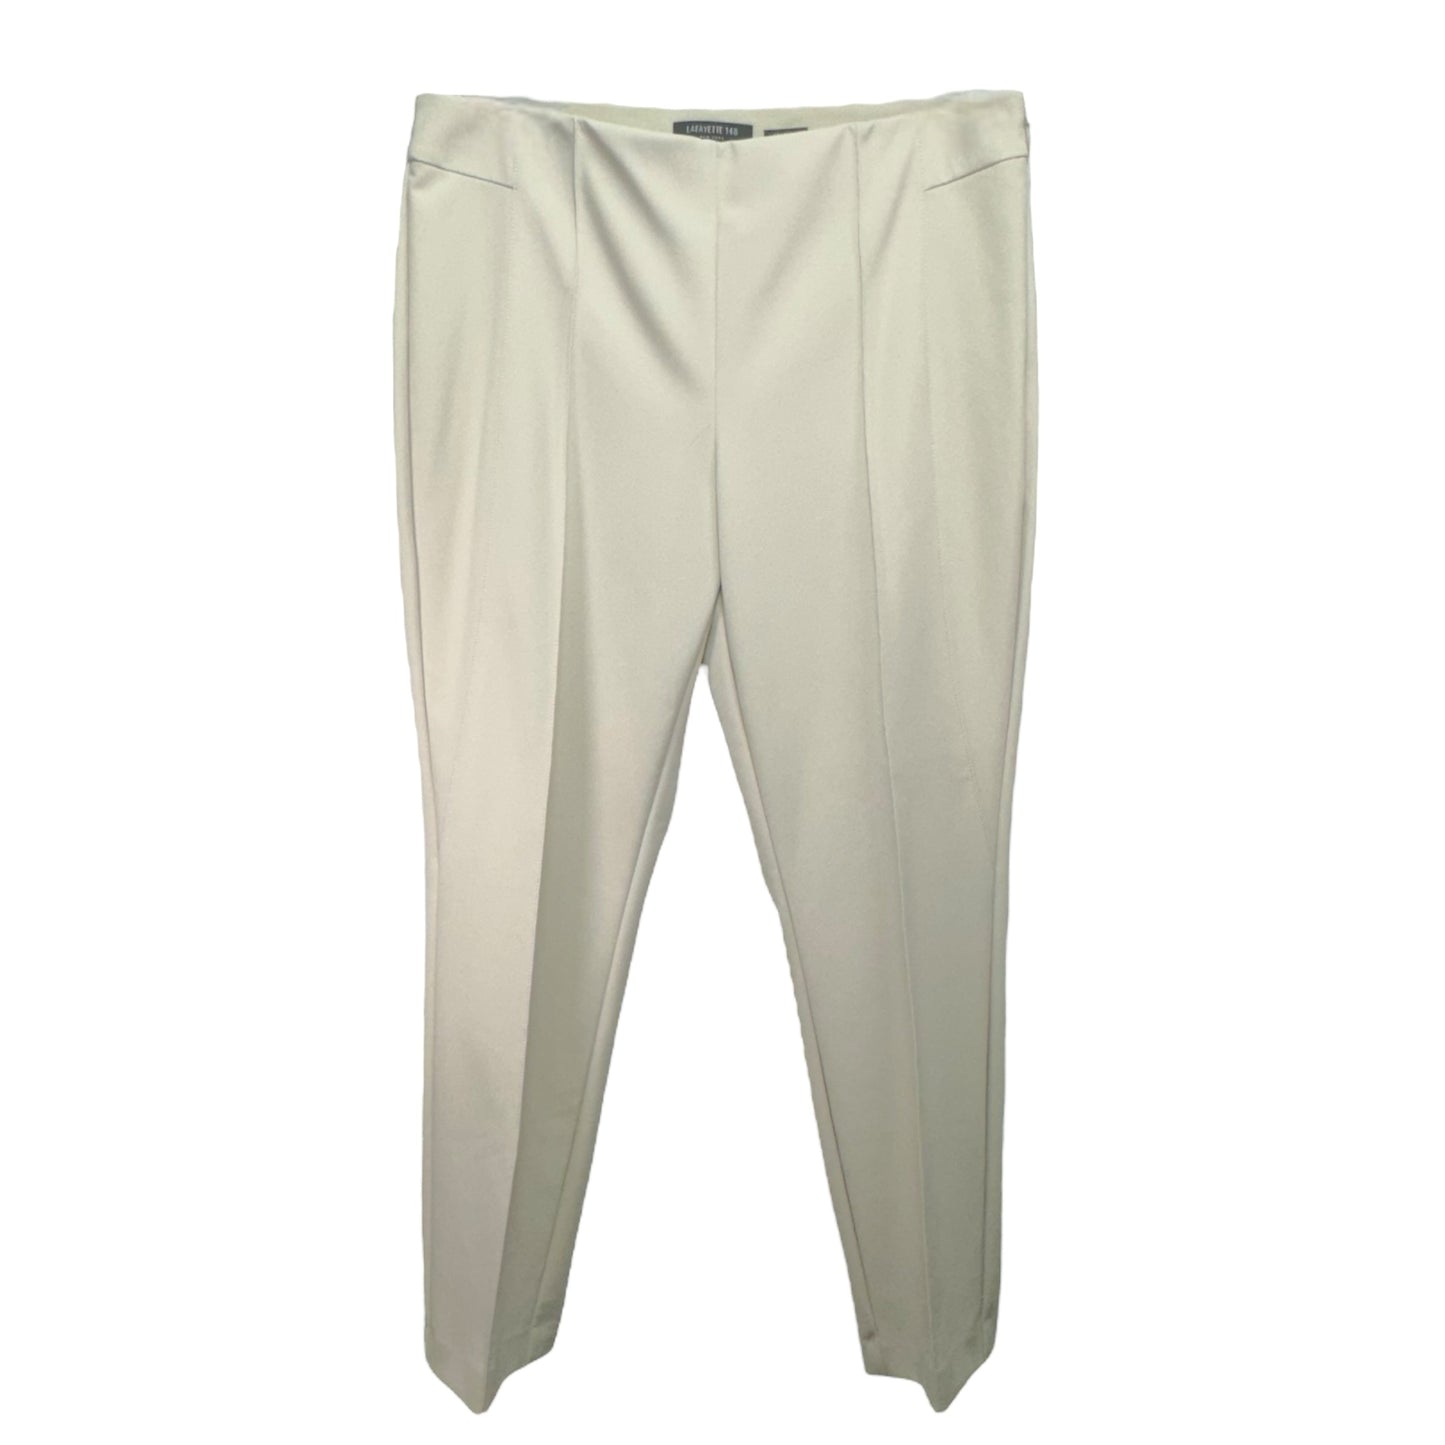 Stretch Grammercy Pant in Sand Designer Lafayette 148, Size 12